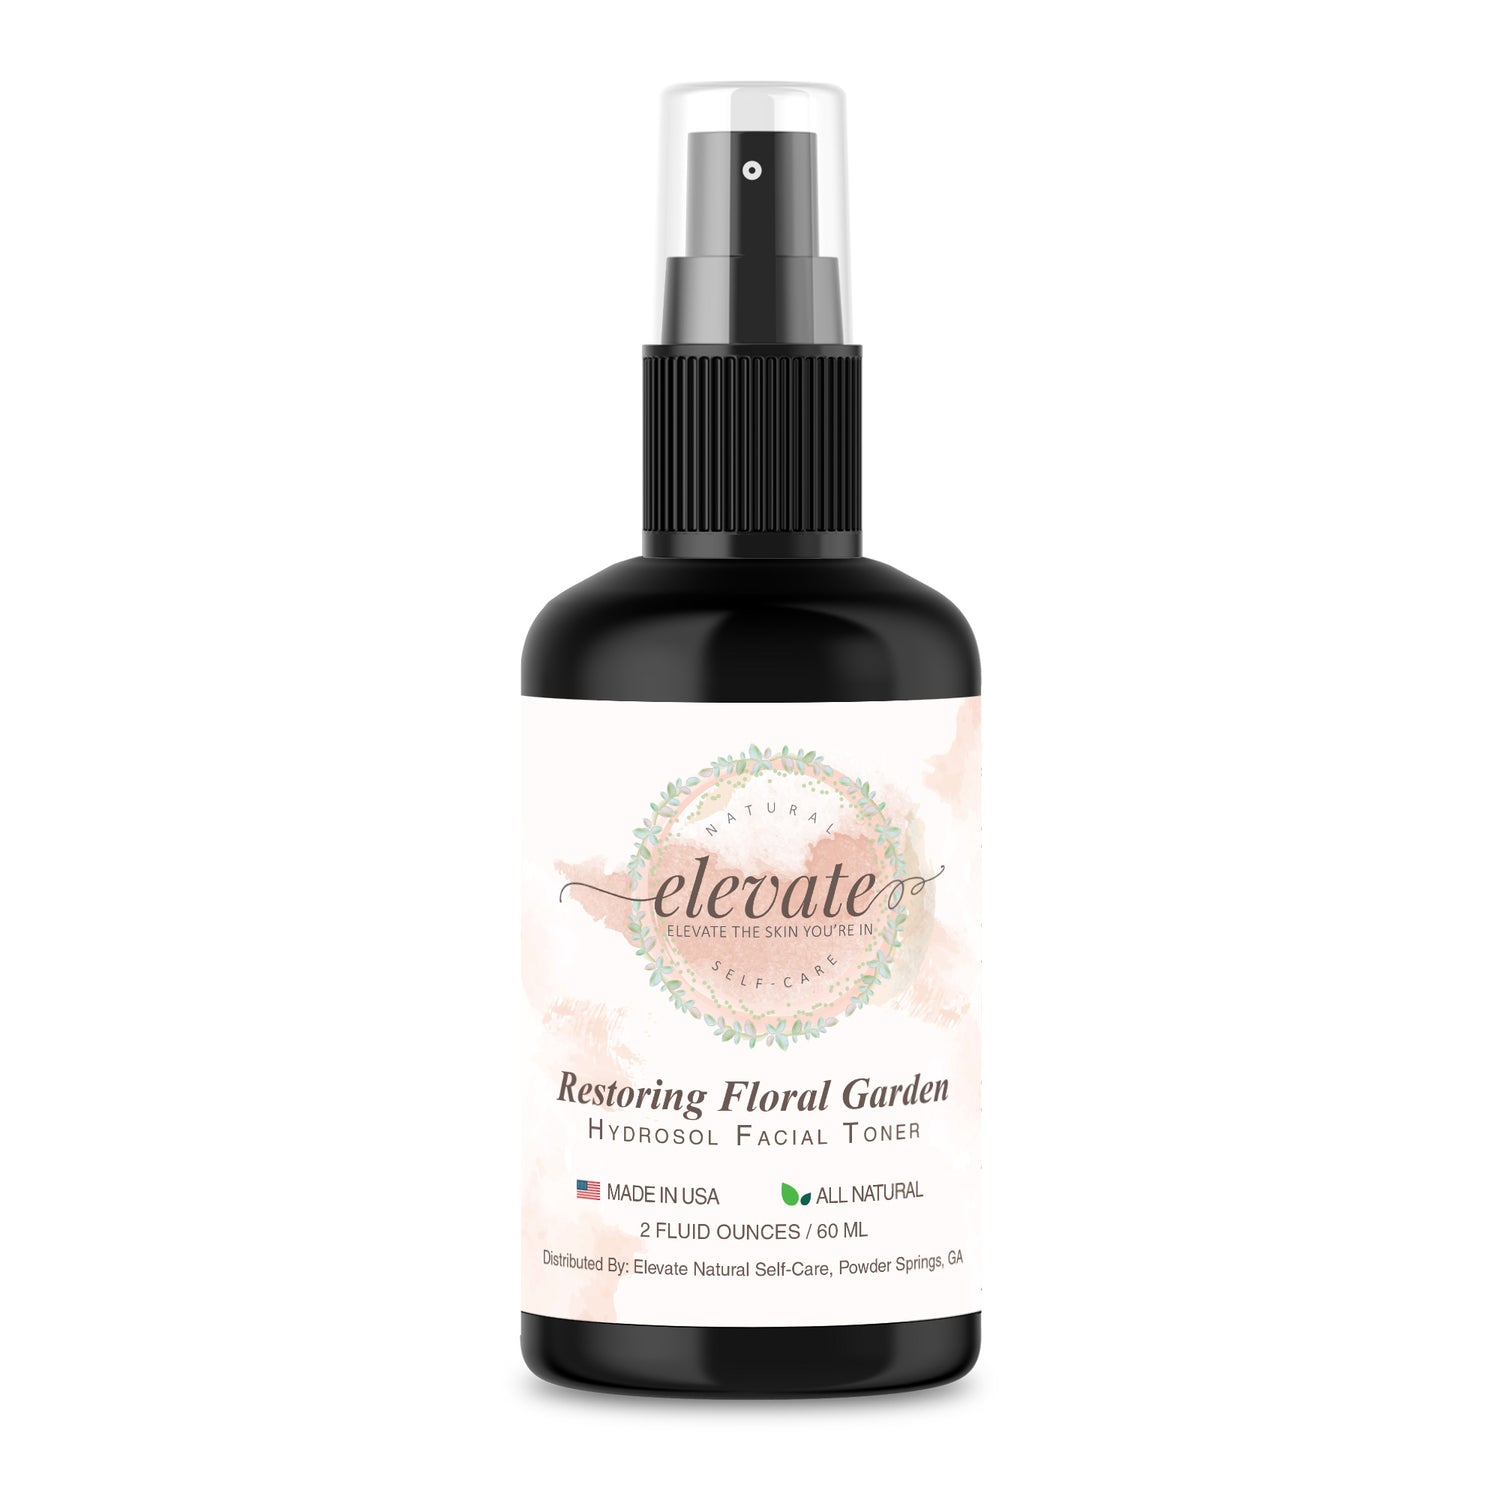 Restoring Floral Garden Hydrosol Facial Toner Spray is a spray-on facial toner handcrafted with pure botanical extracts that contain vitamins and minerals made to help nourish and condition your skin with rich proteins while leaving skin feeling toned and moisturized without heavy oils.